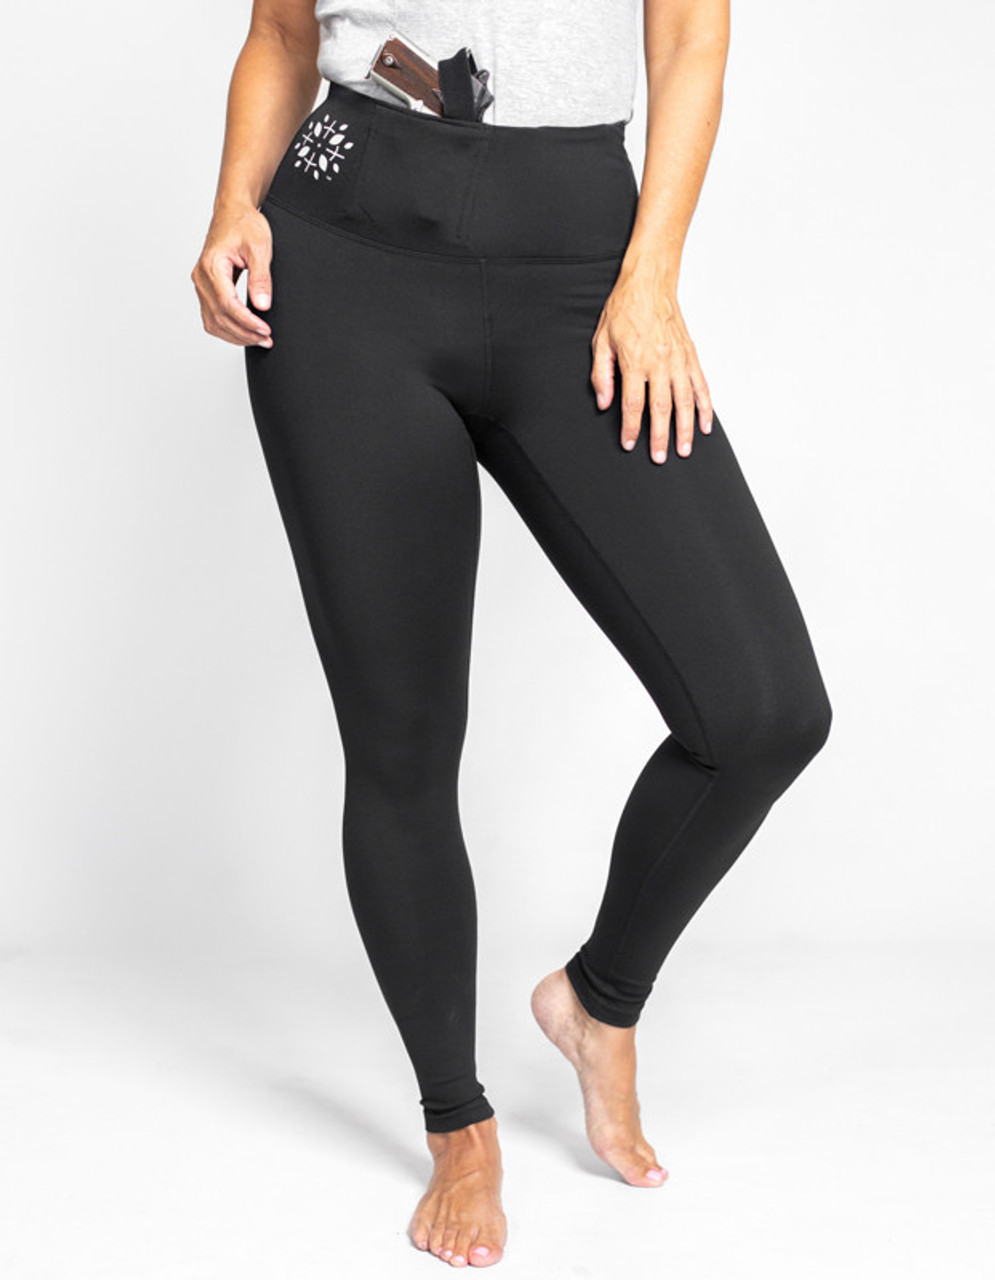 Tactica Defense Concealed Carry Leggings